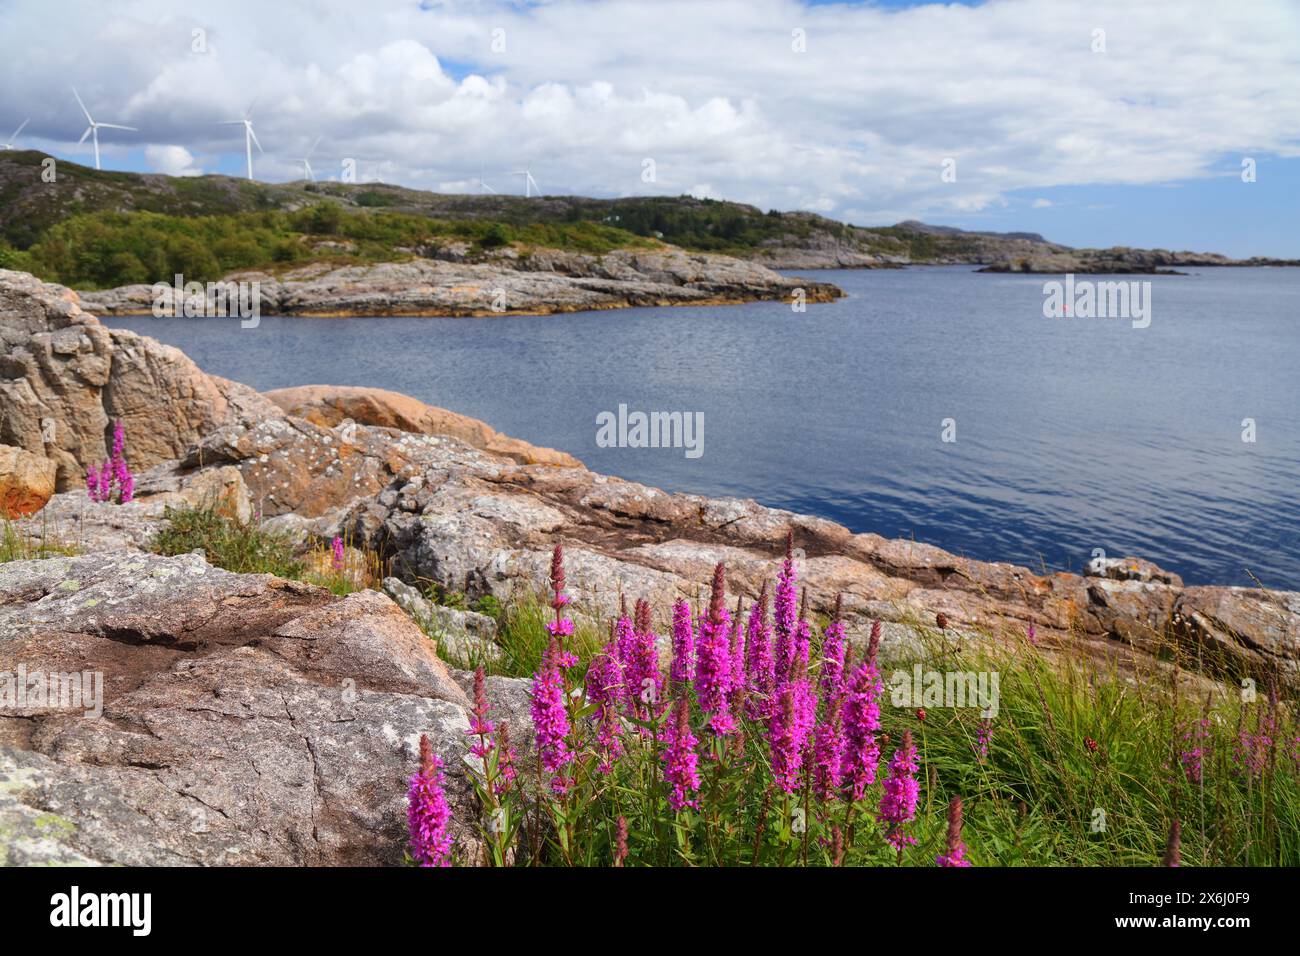 Norway coast landscape with fireweed flowers. Egersund in Rogaland region. Stock Photo